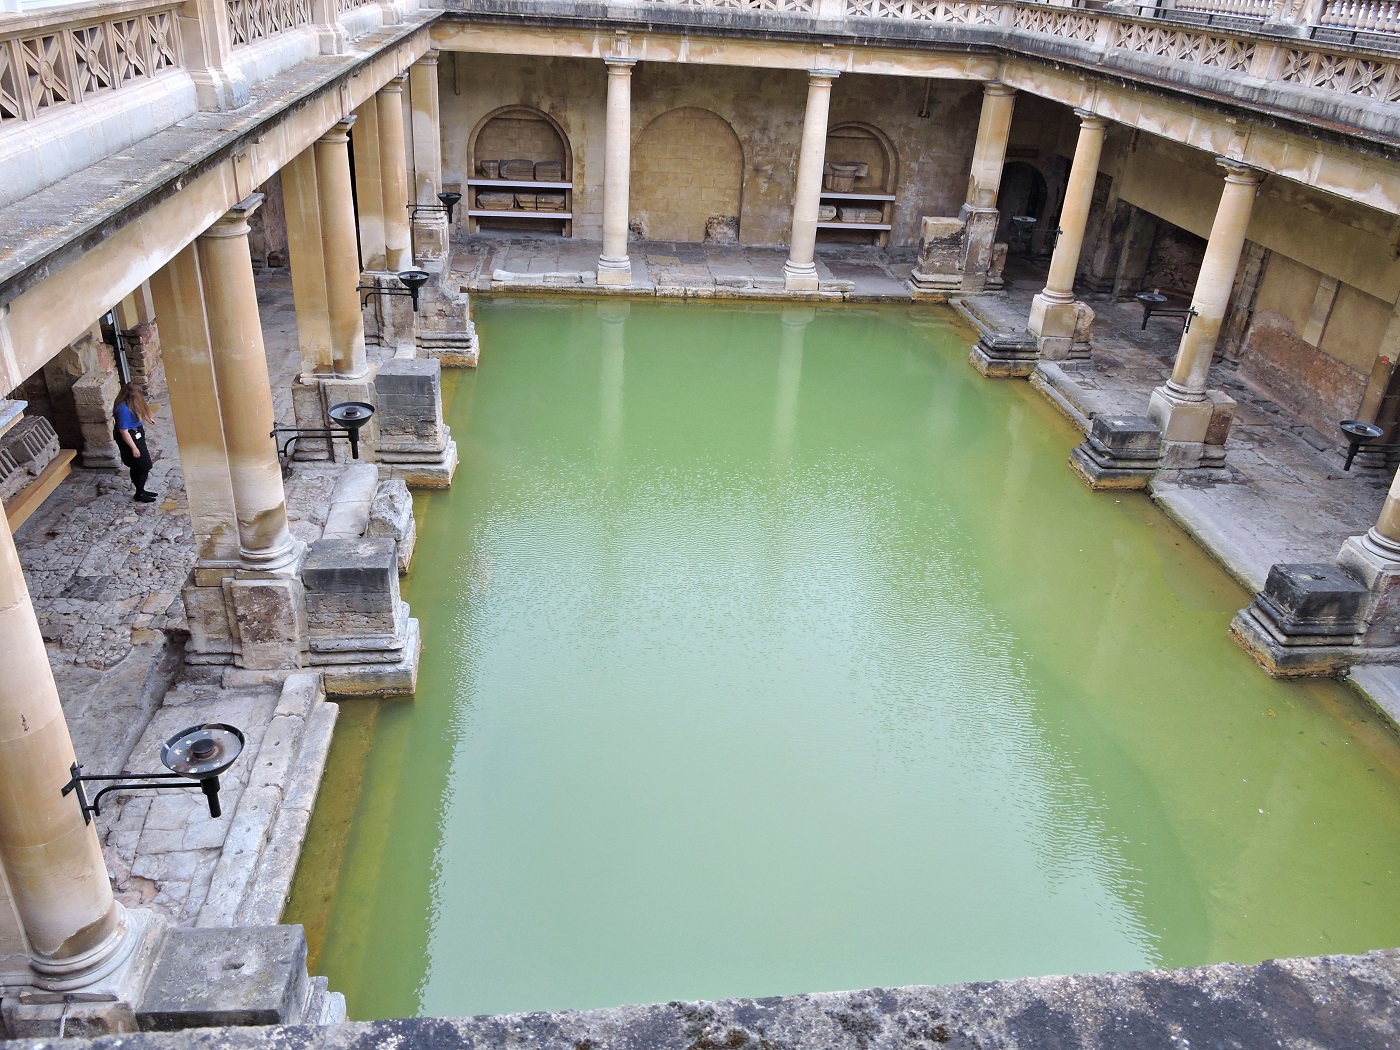 view of great bath pool and stone setting